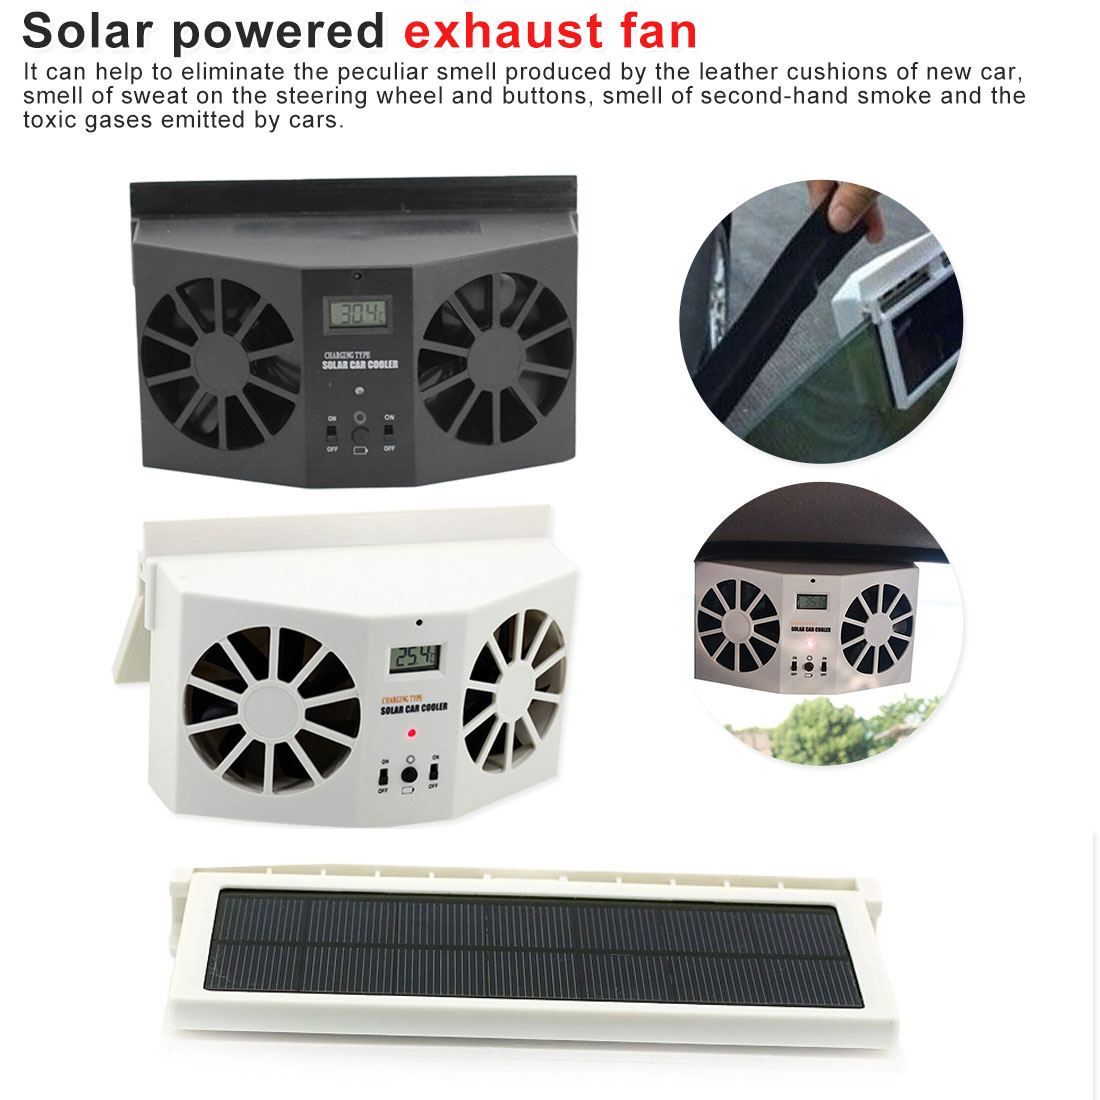 Us 1966 43 Offcar Solar Powered Exhaust Fan Folding Solar Powered Auto Car Window Air Vent Cooling Dual Fan Mini Cooler Radiator Car Inverters within dimensions 1100 X 1100